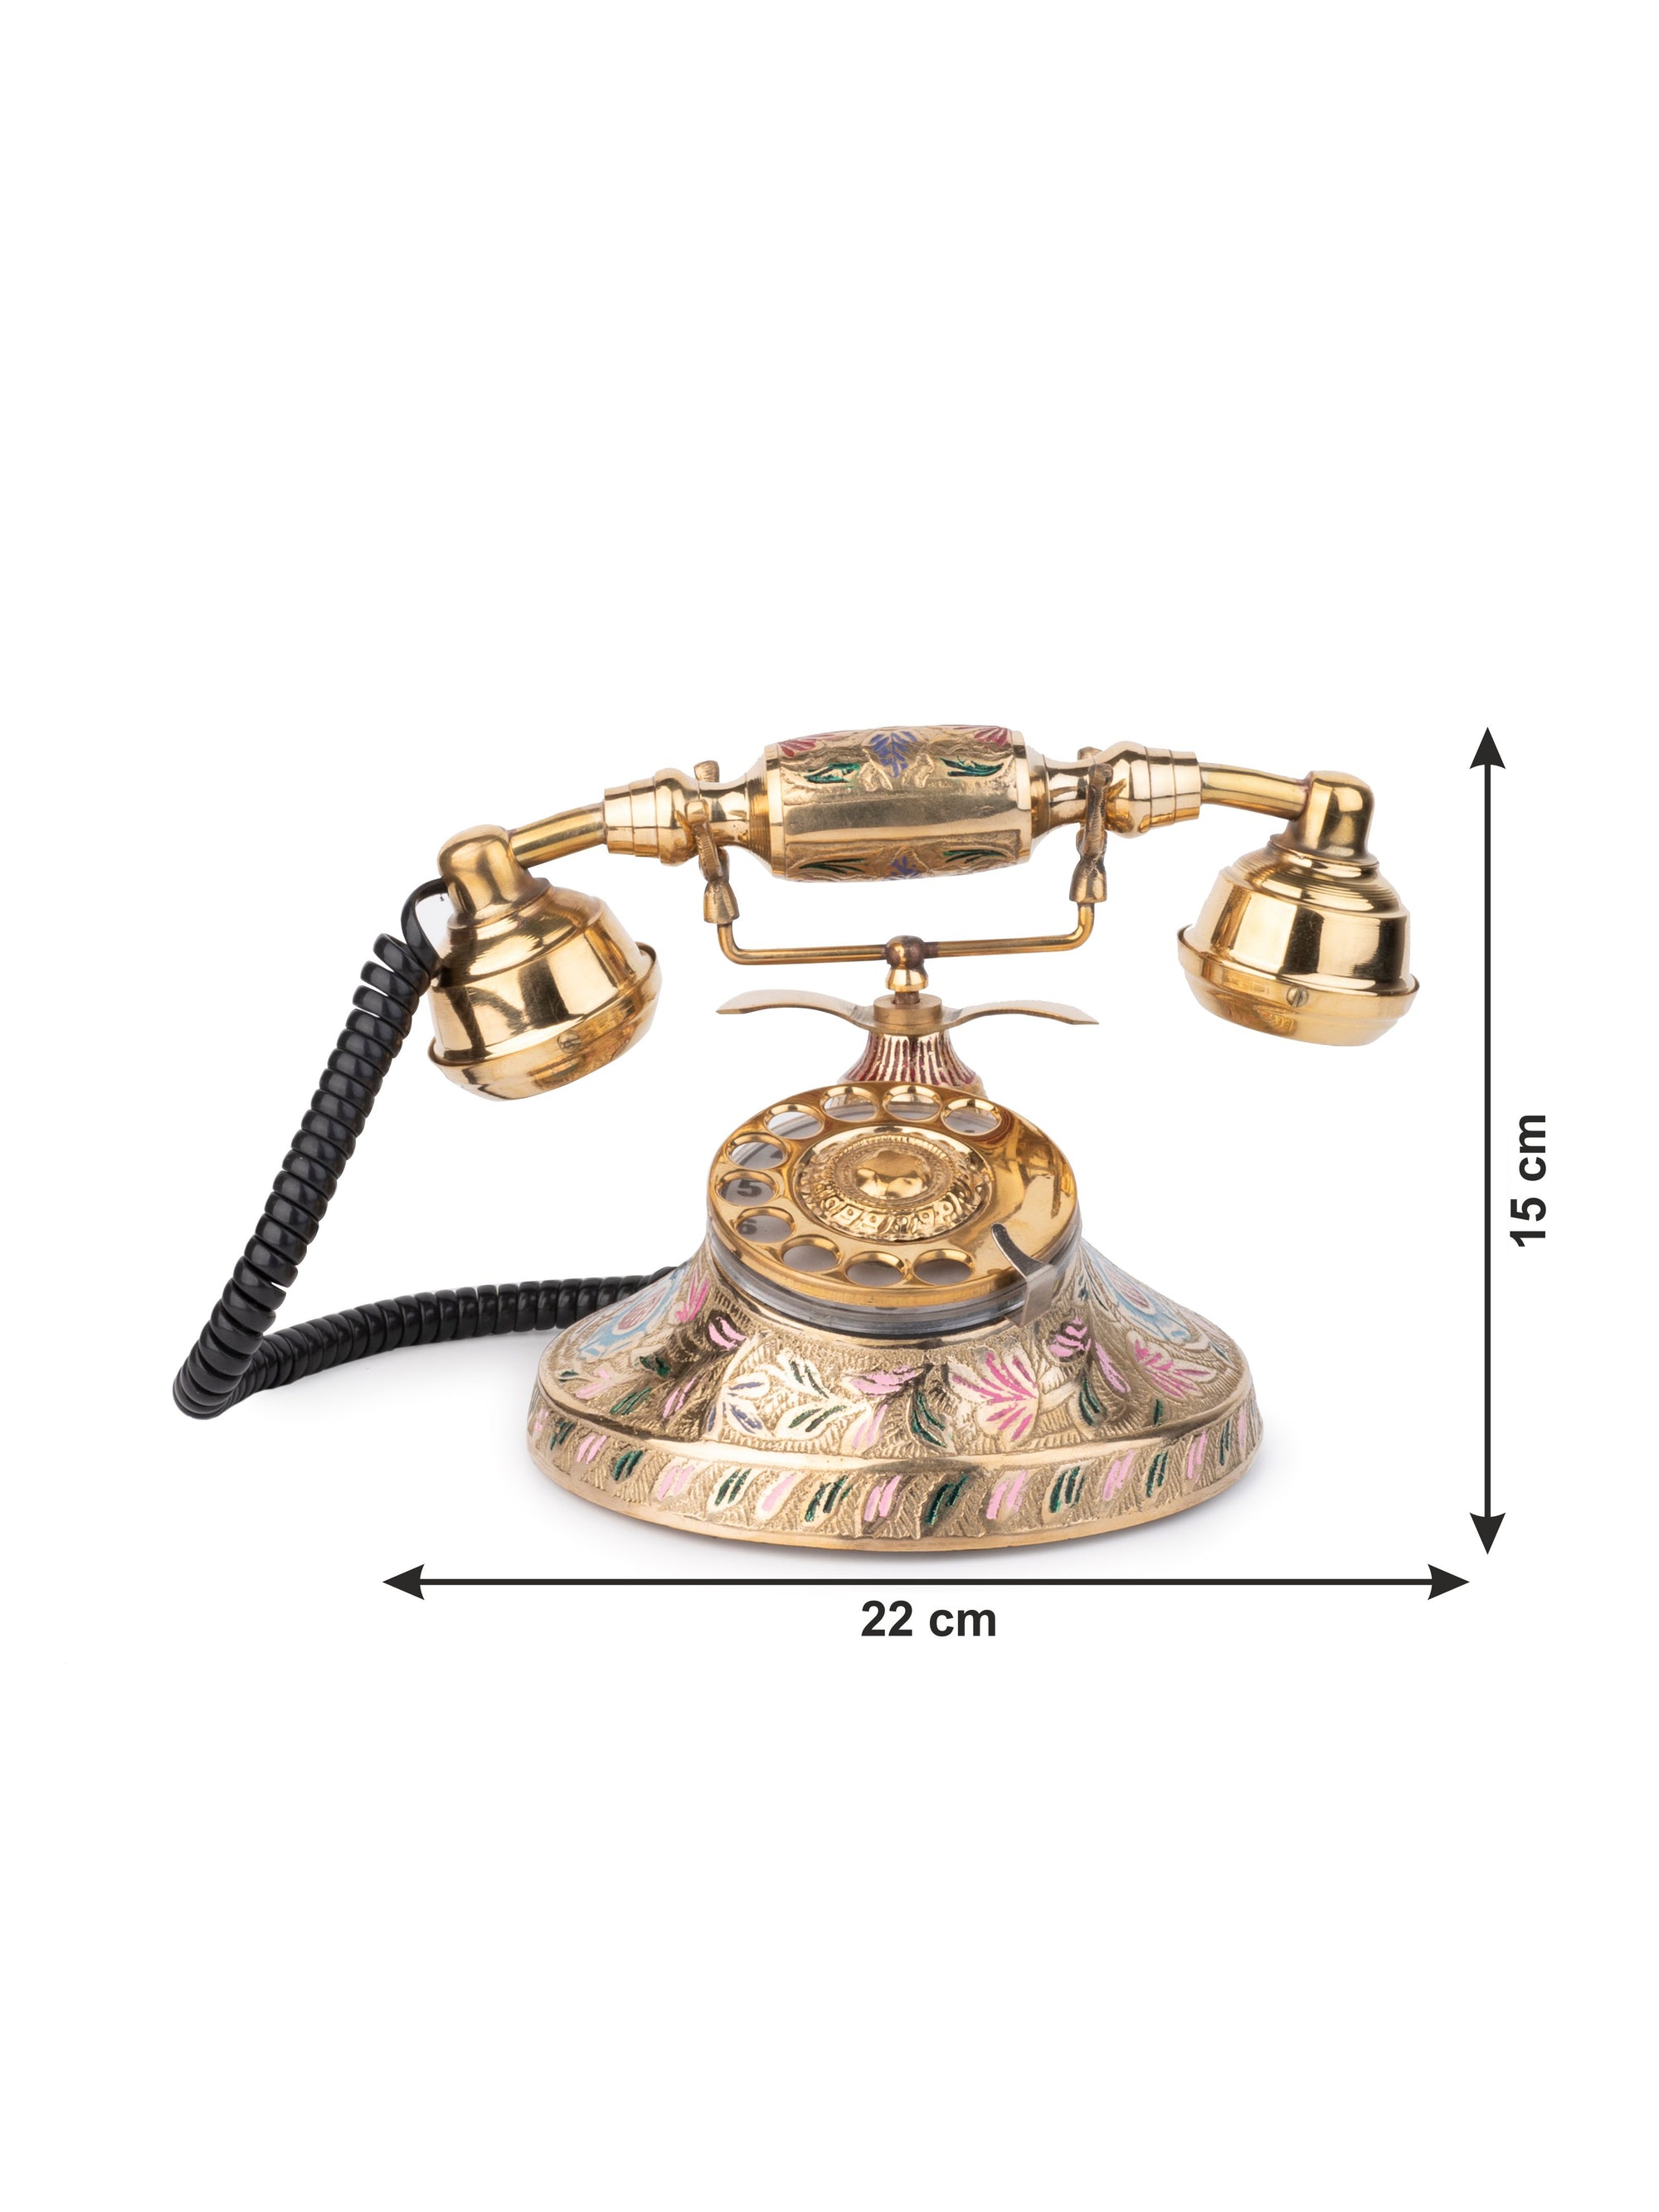 Brass Crafted Colorful Retro Landline Phone for Home and Office Decor